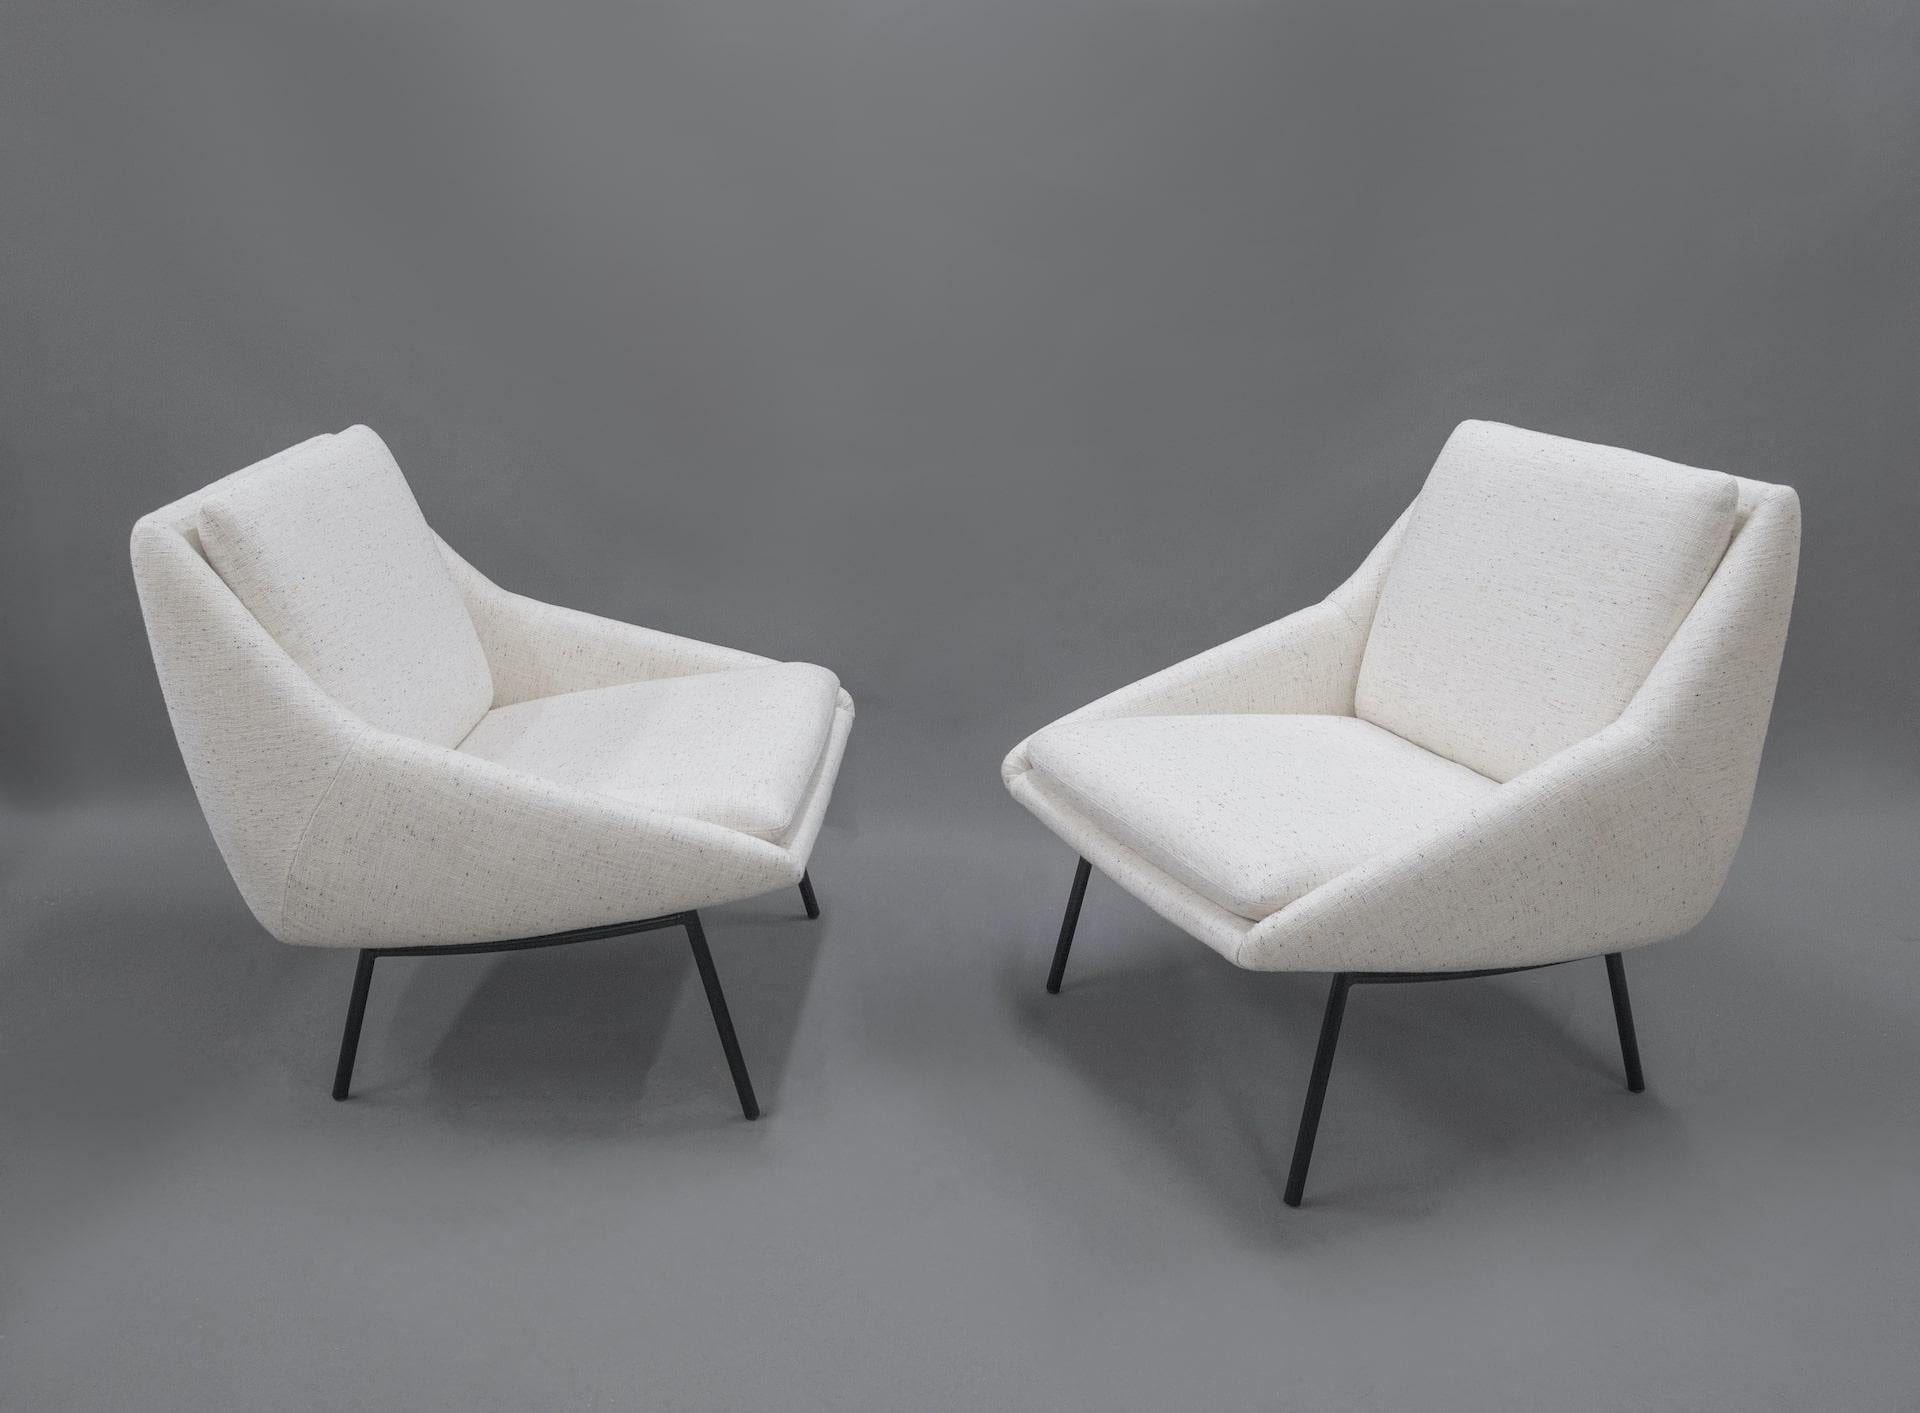 Joseph-André MOTTE (1925-2013) 

Very graphic pair of armchairs model 800 , Steiner edition.
Fabric 